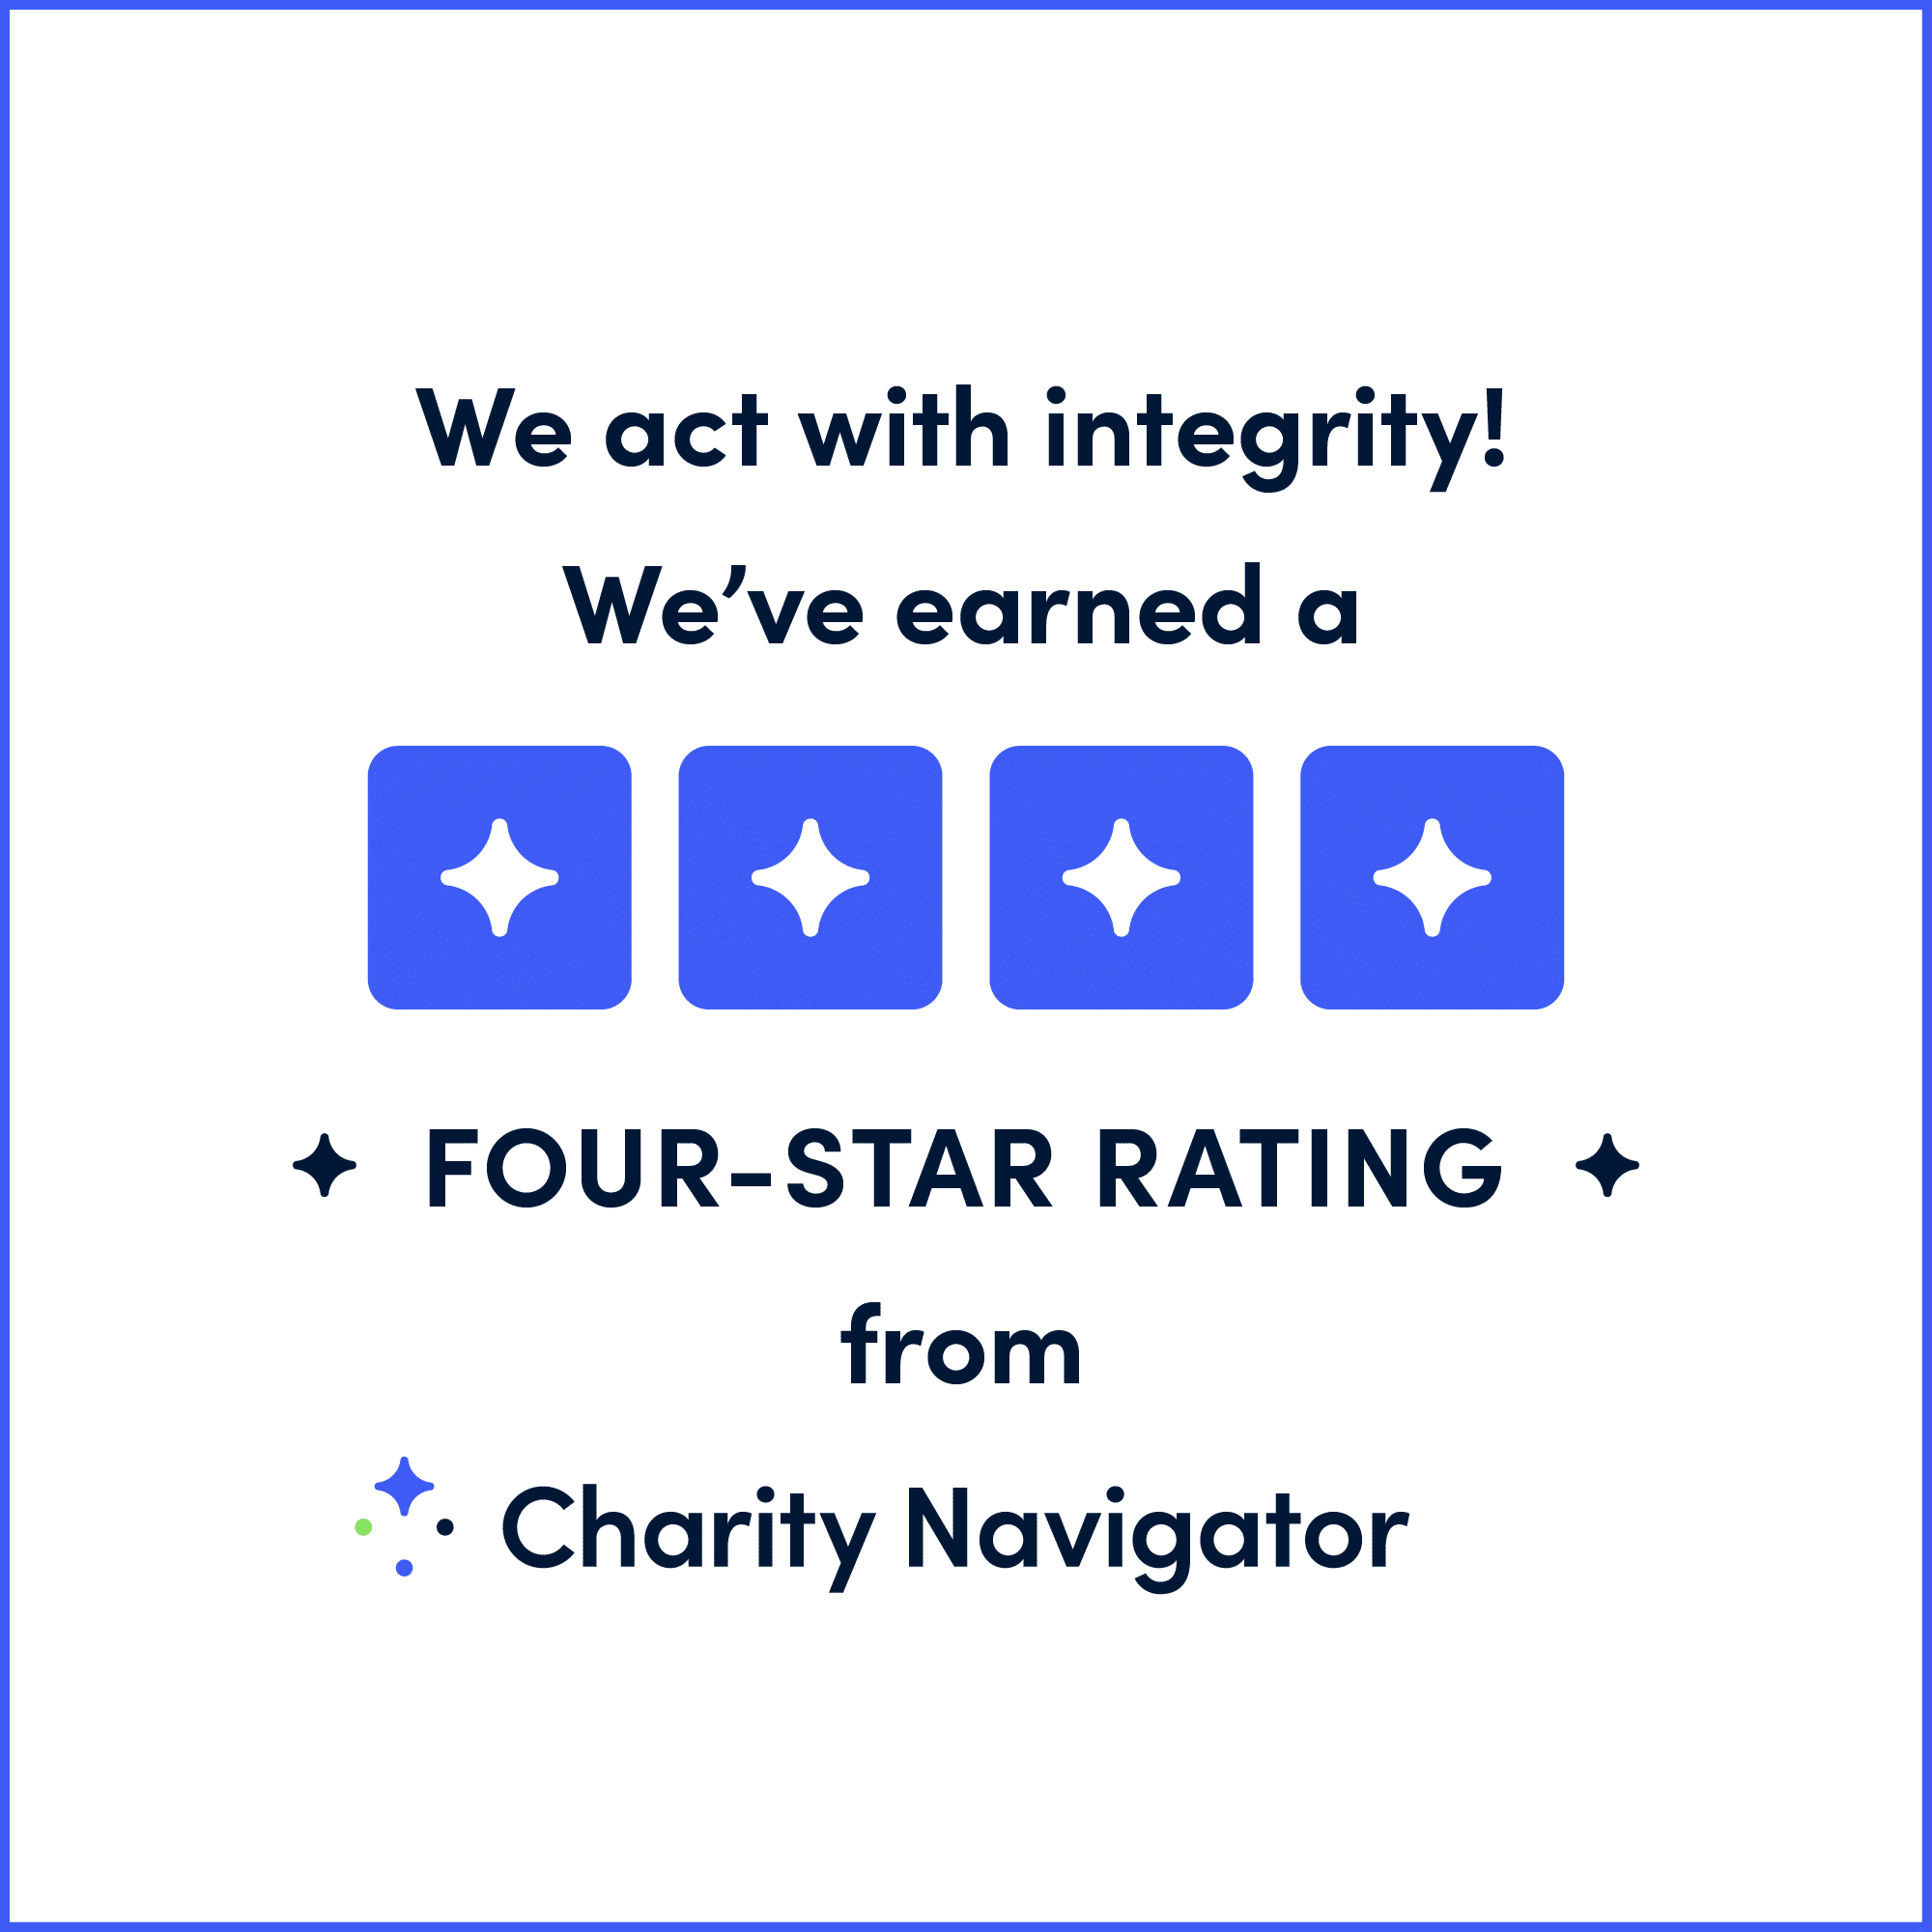 We act with integrity! We earned a four-star rating from Charity Navigator.